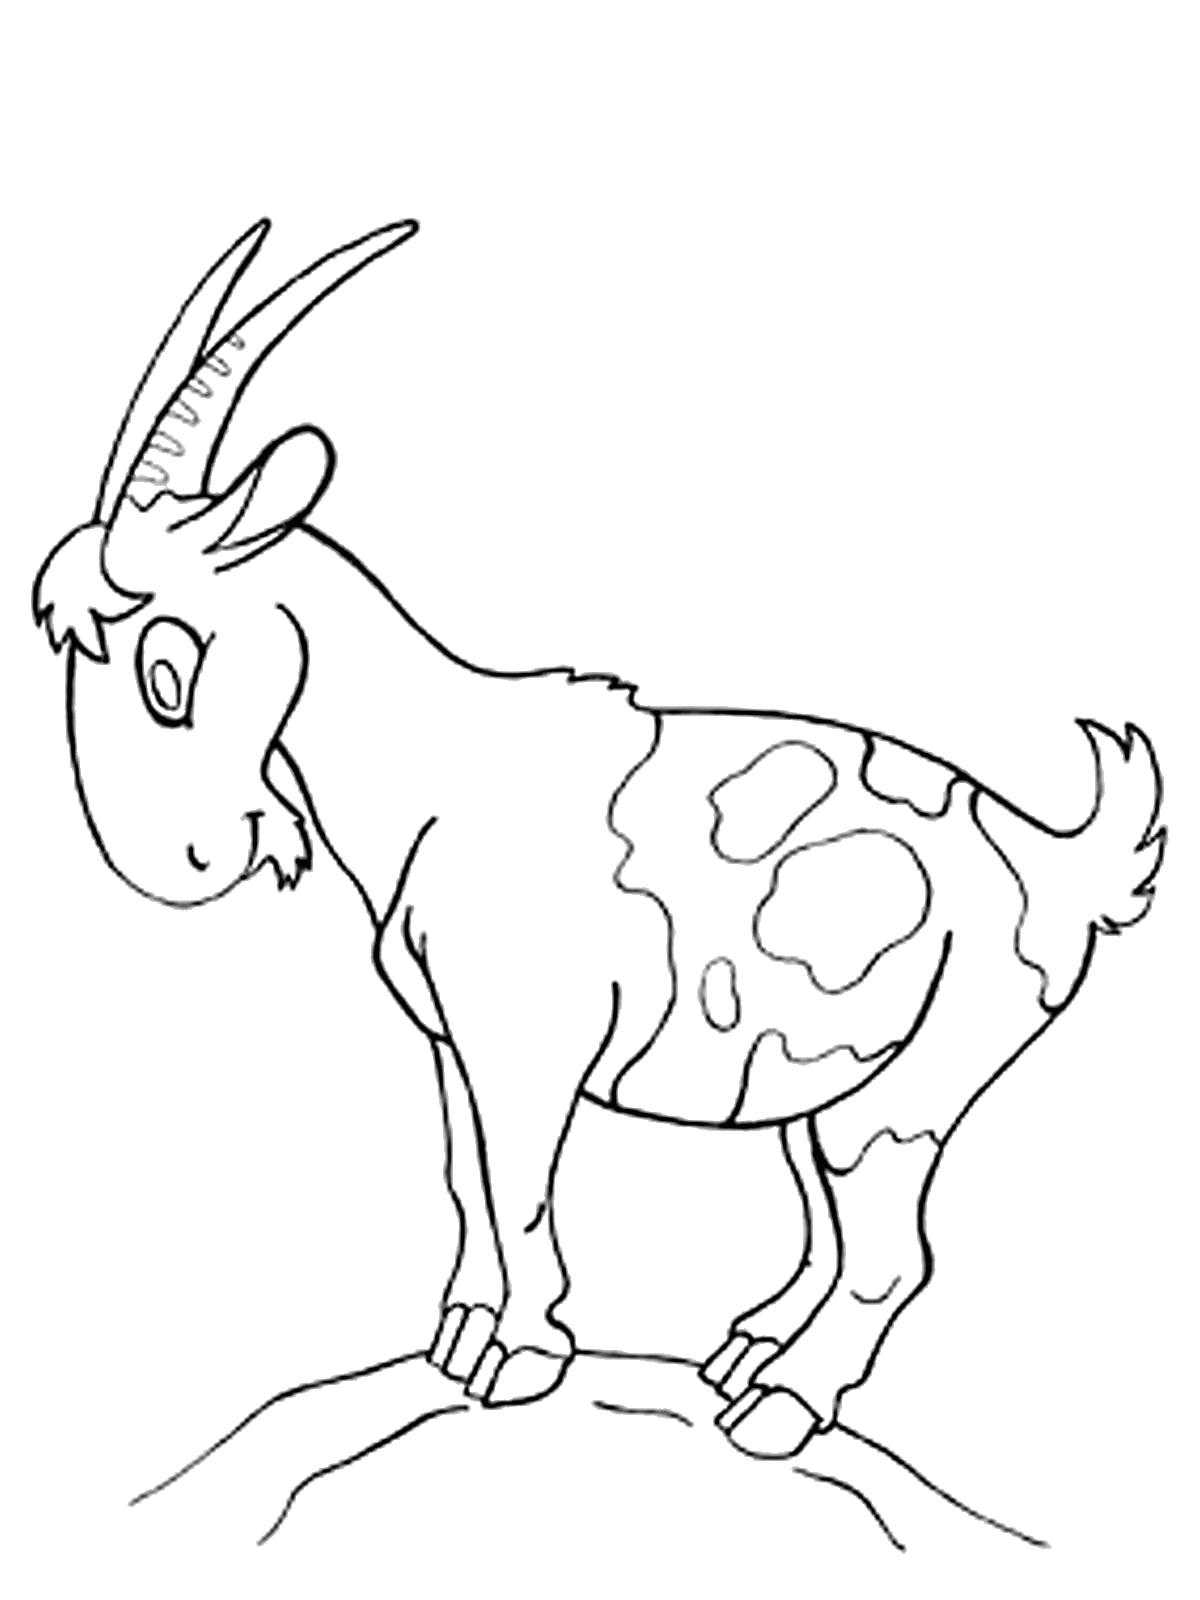 Coloring Goat on the mountain. Category Pets allowed. Tags:  goat, mountain.